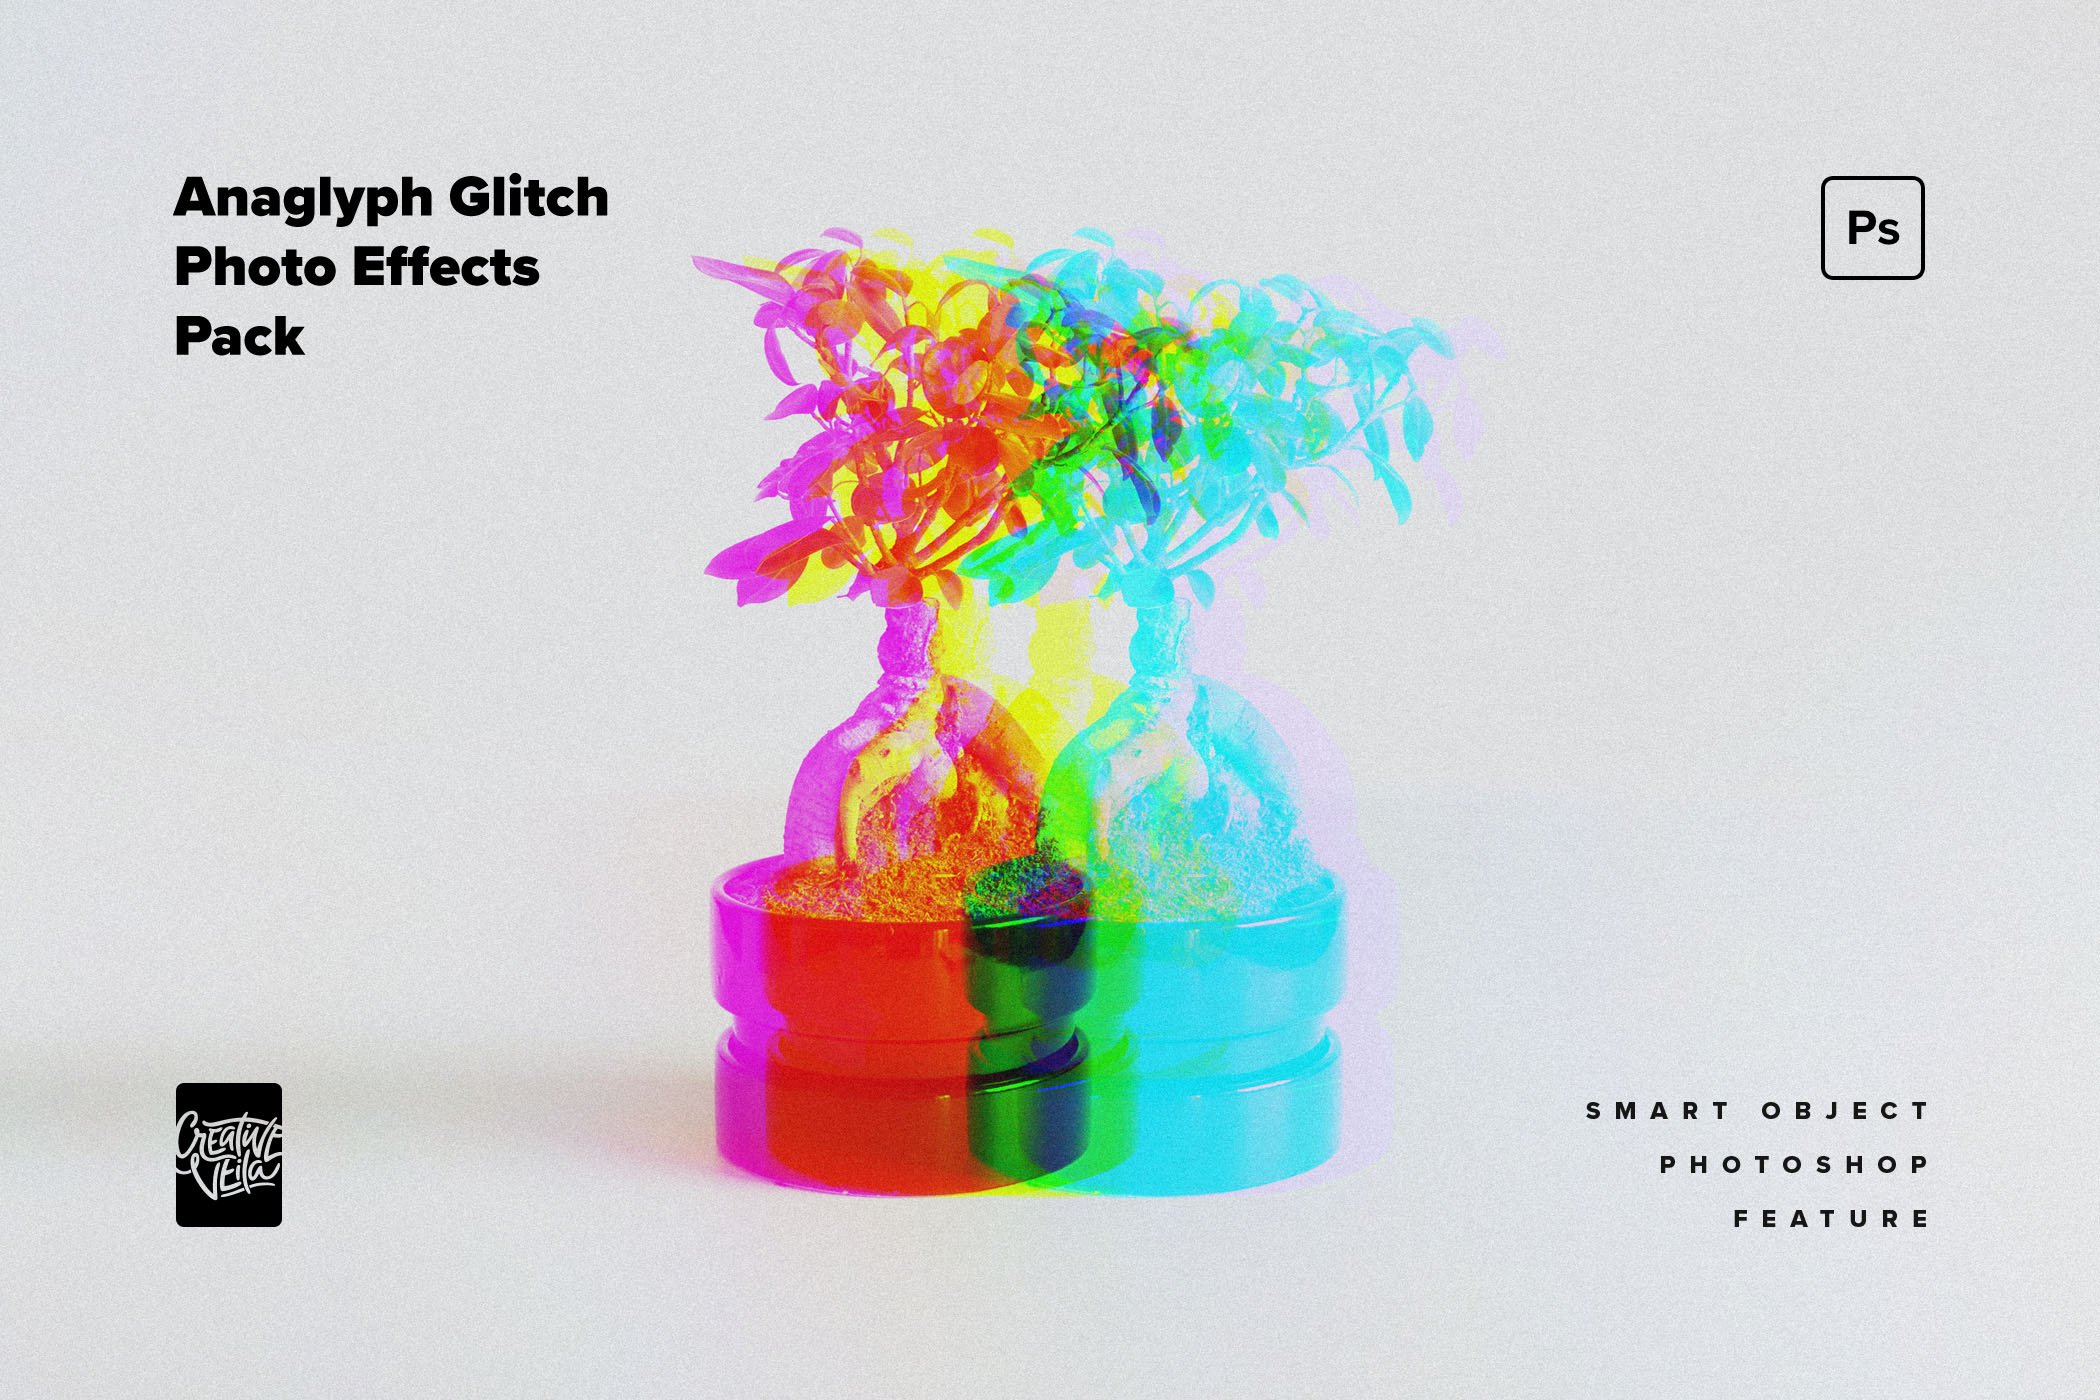 anaglyph glitch photo effects pack by creative veila 06 763